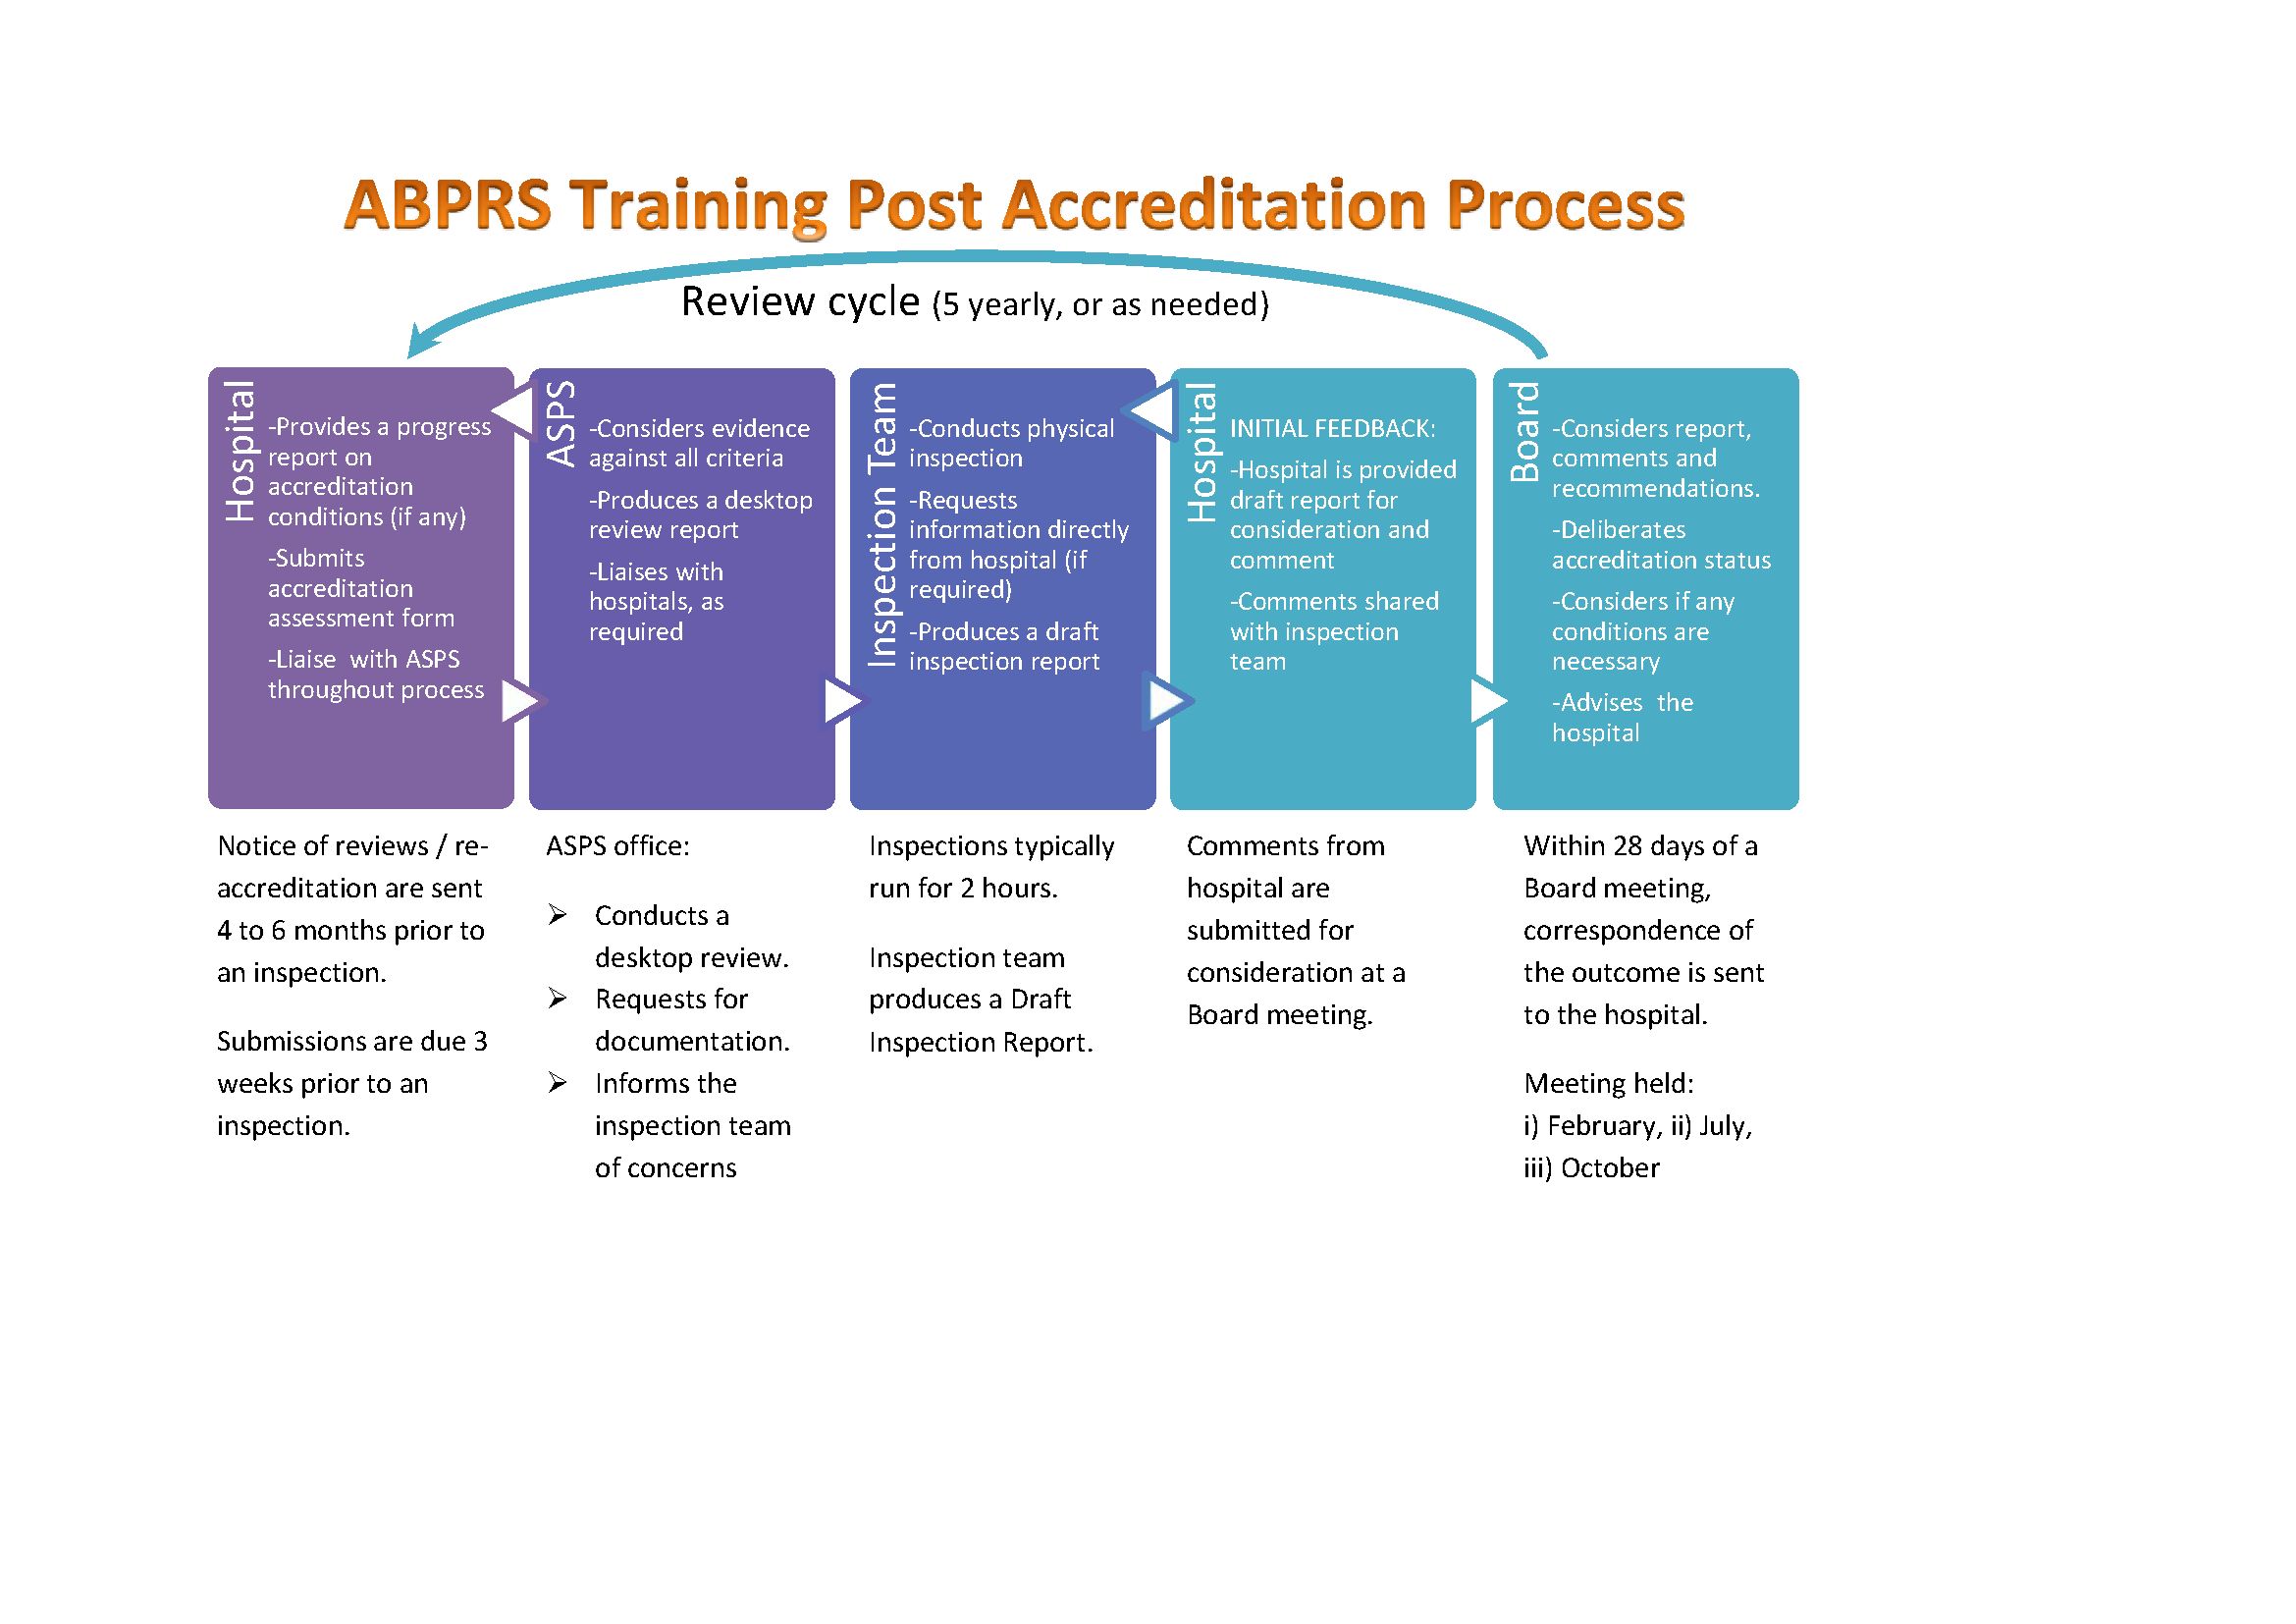 Graphic representation of the ABPRS training post accreditation process